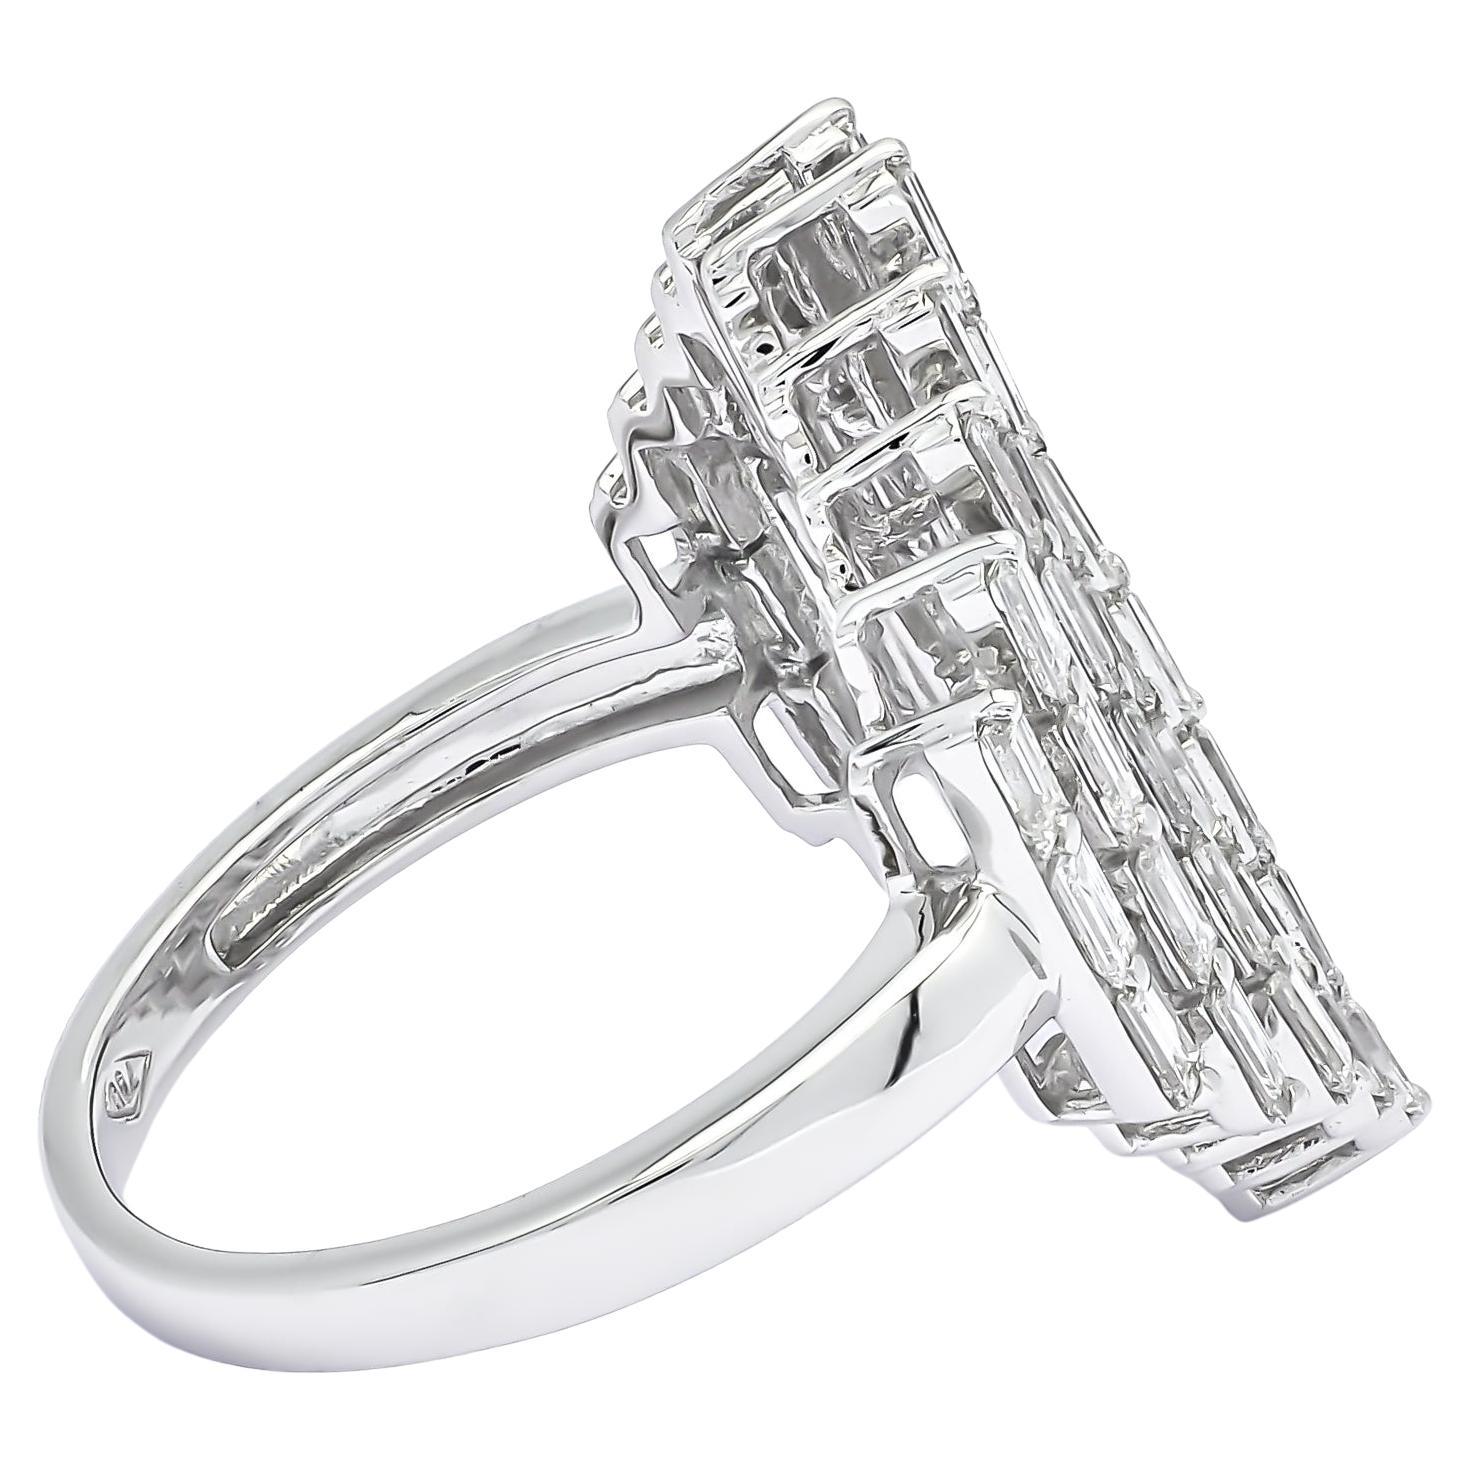 Bold Geometric Vertical Settings of Baguette Diamonds Impart Light-Catching Sparkle From Every Angle of This Statement-Making White Gold Ring

Architectural Steeple Shape Ring of 18k white Gold Multi Row of Baguette Diamonds is Giving This Glamorous